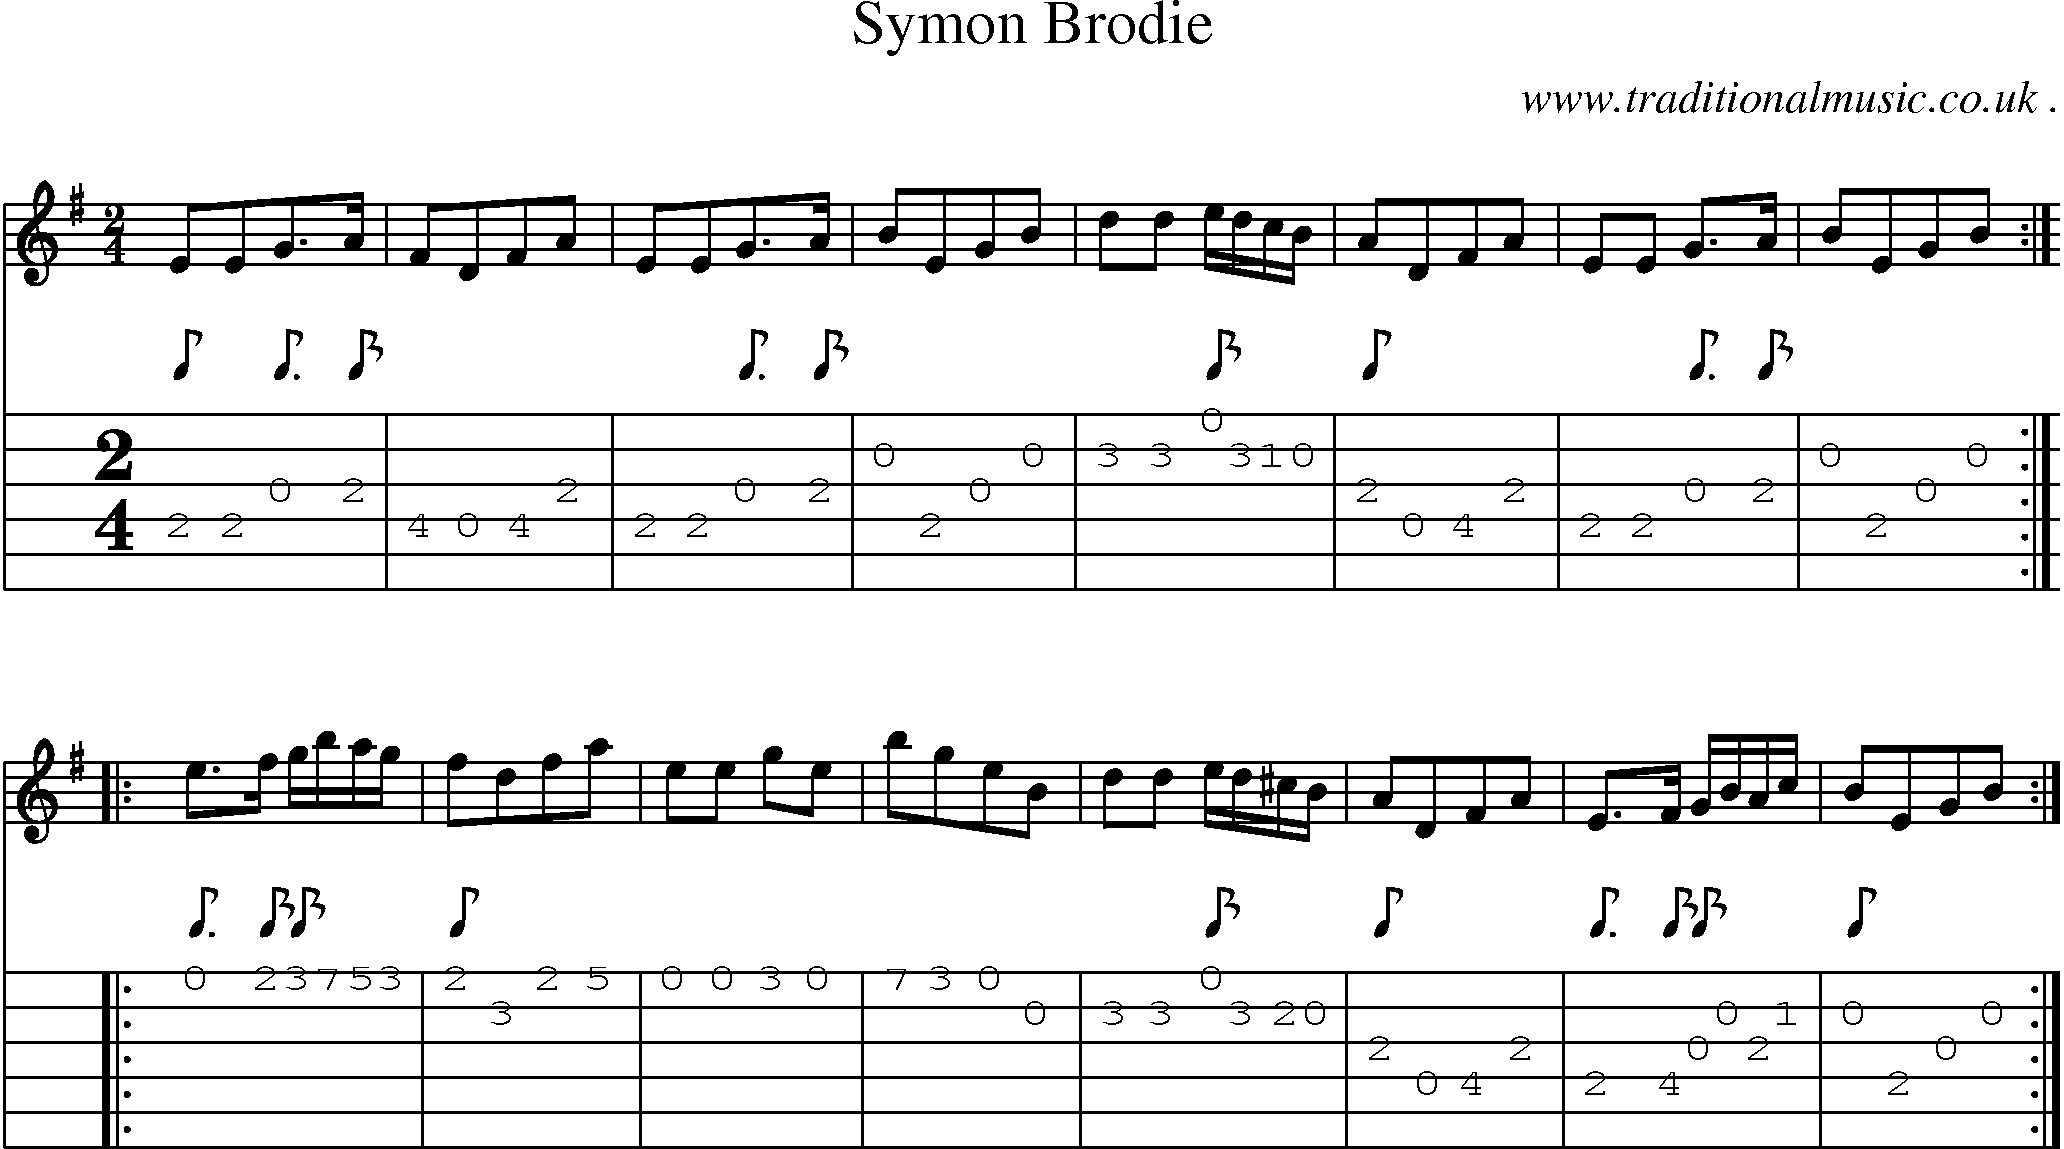 Sheet-Music and Guitar Tabs for Symon Brodie